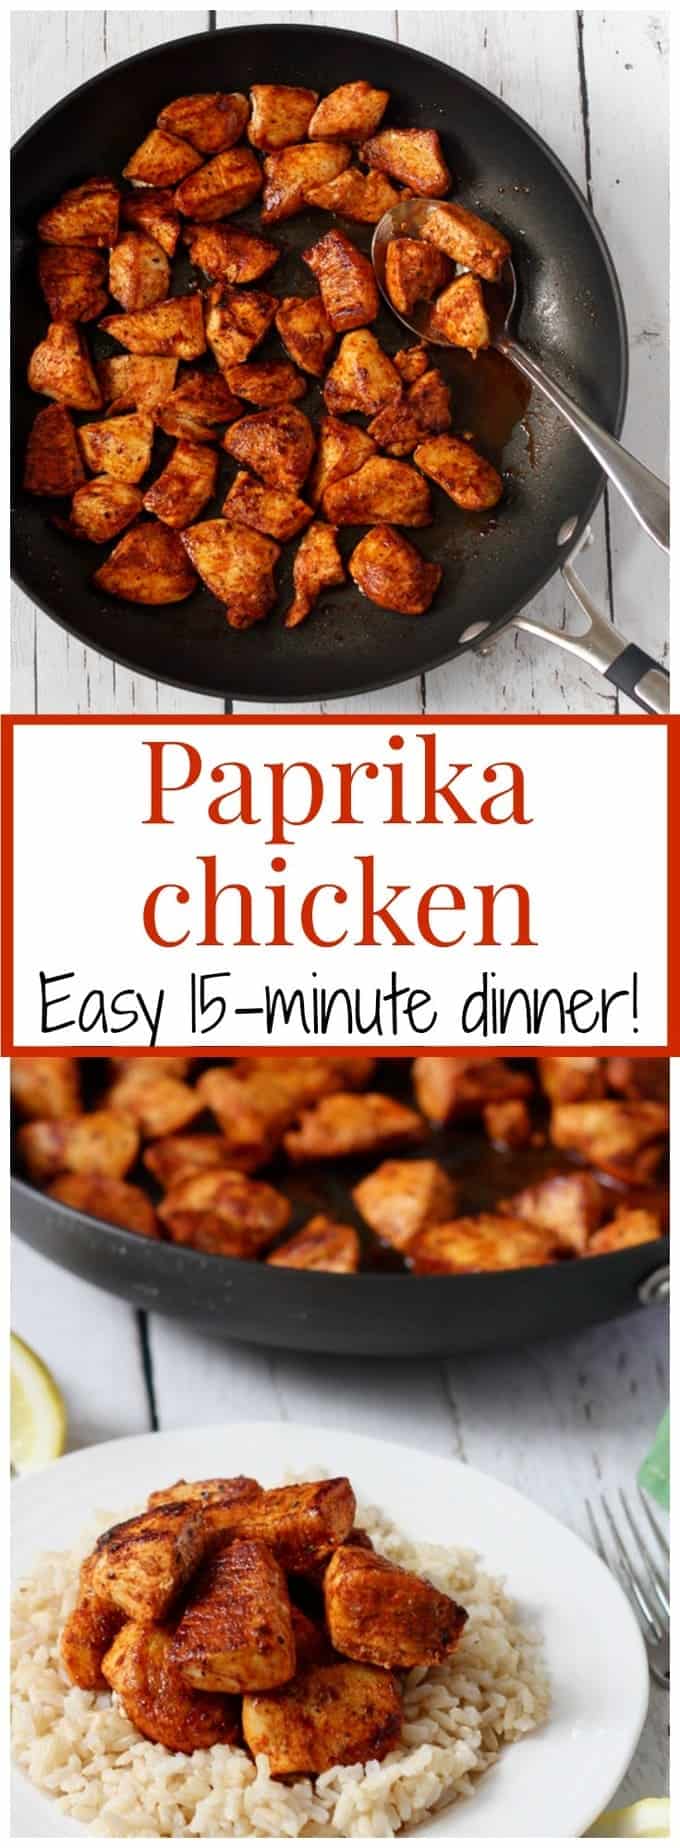 A 15-minute paprika chicken recipe that uses on-hand ingredients for big flavor! | FamilyFoodontheTable.com